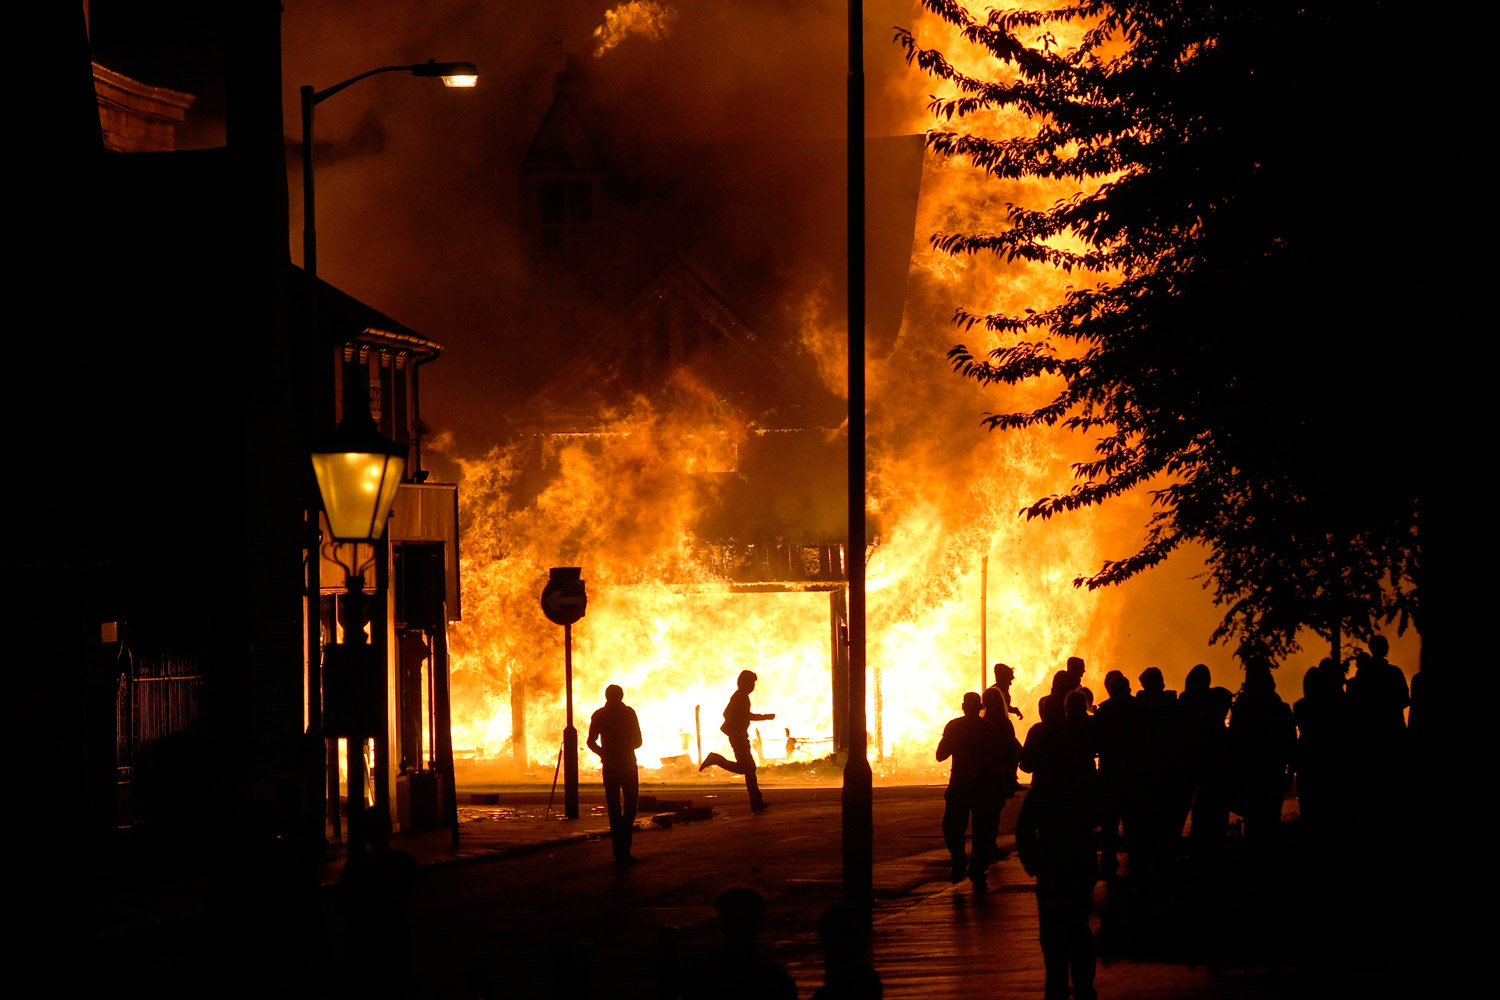 August 8, 2011. A shop is set on fire as rioters gather in Croydon, south London, violence and looting spread across some of London's most impoverished neighborhoods with youths setting fire to shops and vehicles, during a third day of rioting in the city that will host next summer's Olympic Games.